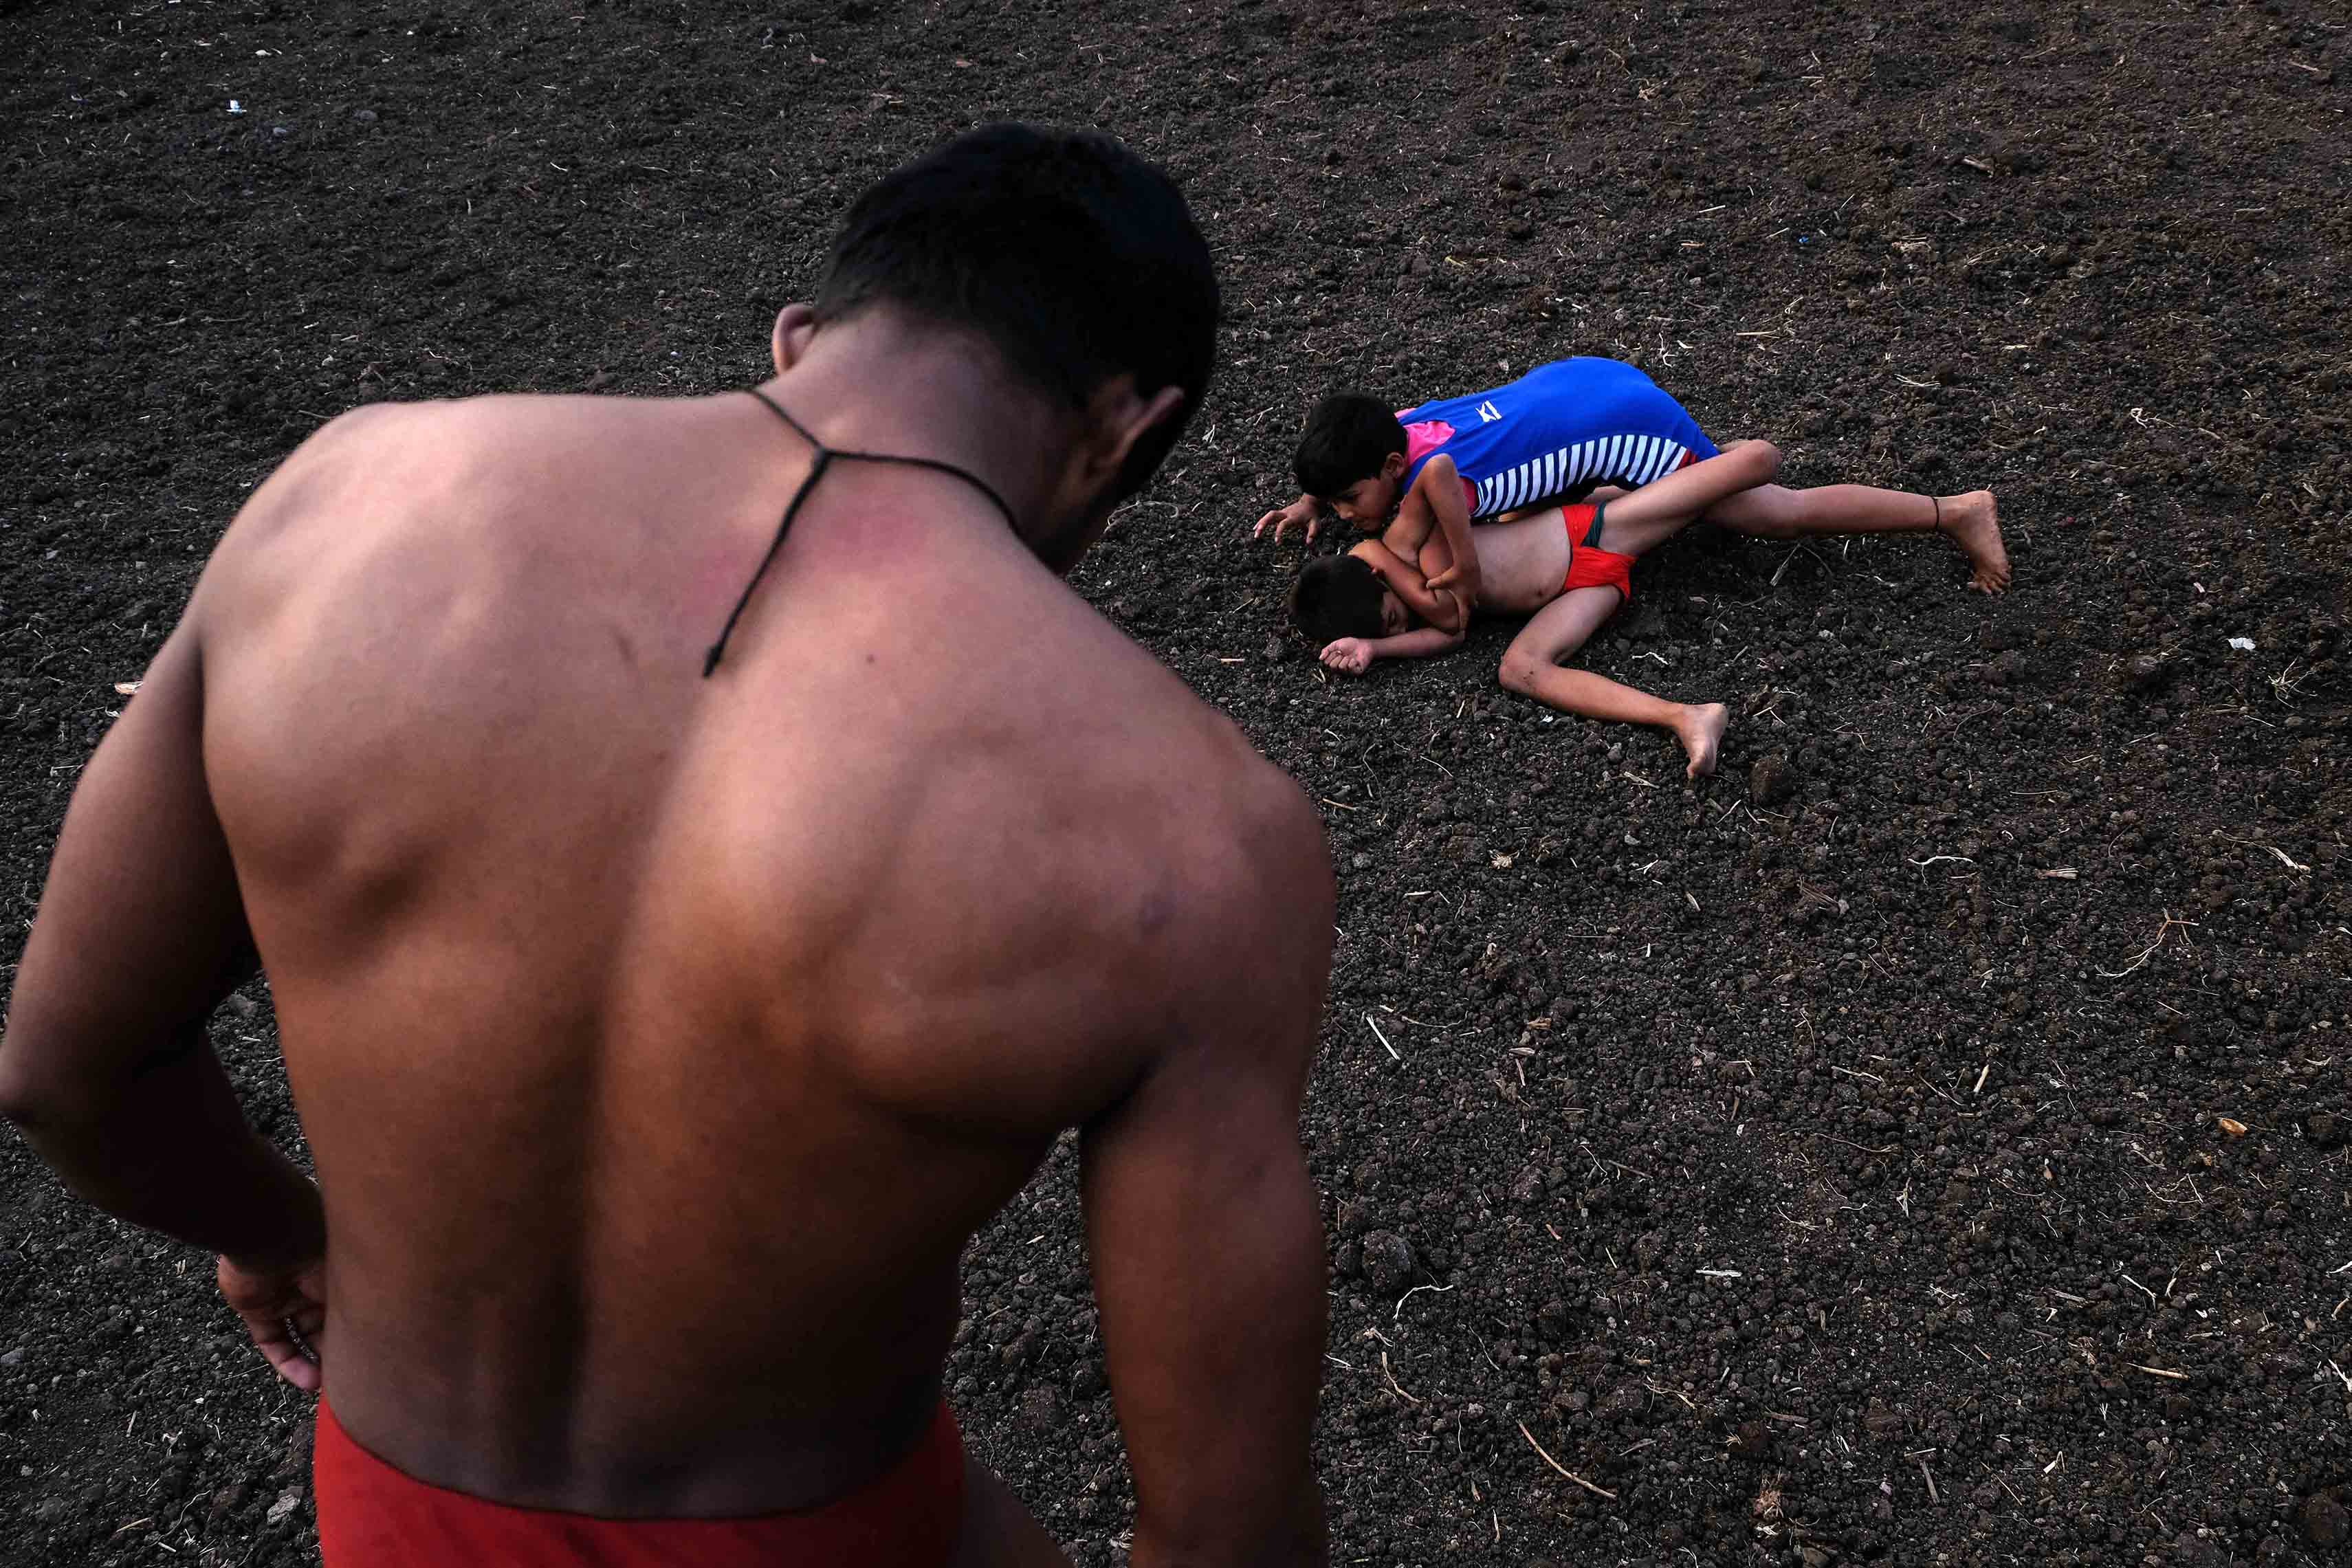  Eight-year-old Sairaj Shelke (in red langot) and 7-year-old girl Gautami Chorge (blue tracksuit) fighting for a championship title in Savade village. Till a few years back, women were prohibited from wrestling. But now the scenario has changed, especially after the success of the Bollywood movie 'Dangal' which was based on the real-life story of the Phogat sisters from Haryana. Photograph by Indrajit Khambe ©Sahapedia 